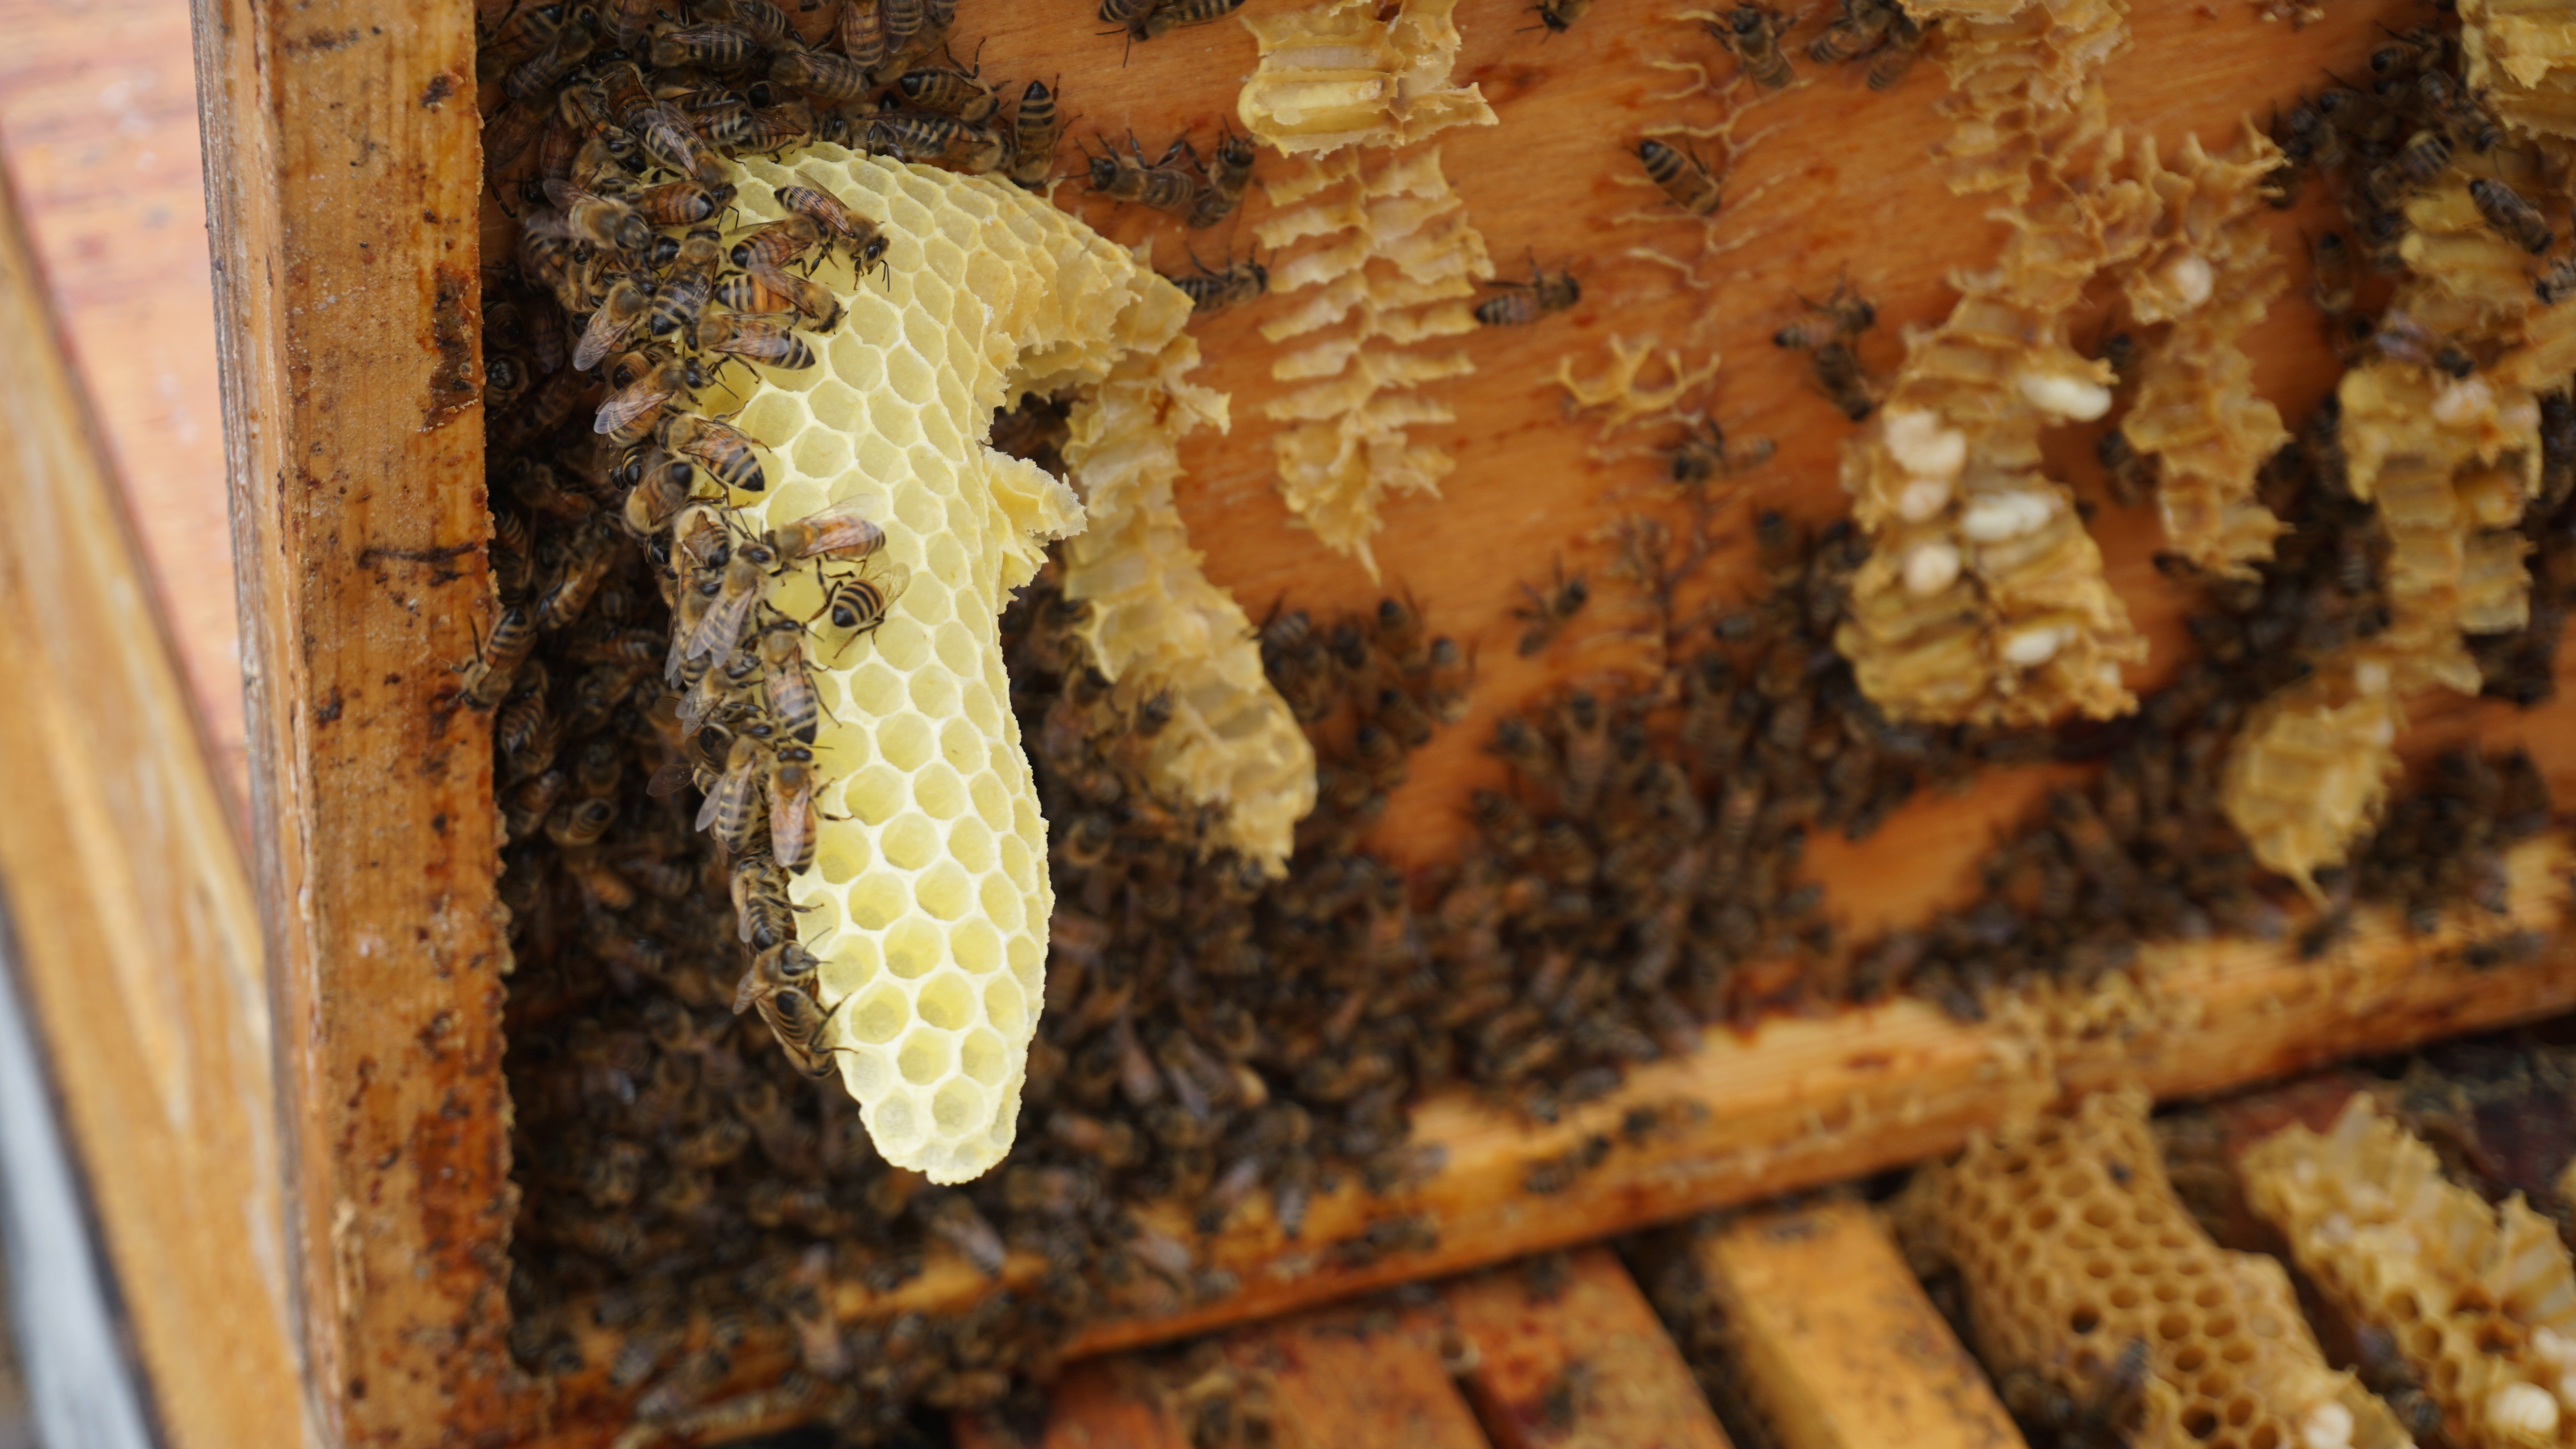 OPG's Niagara Operations is home to one of the largest bee colonies in Canada.